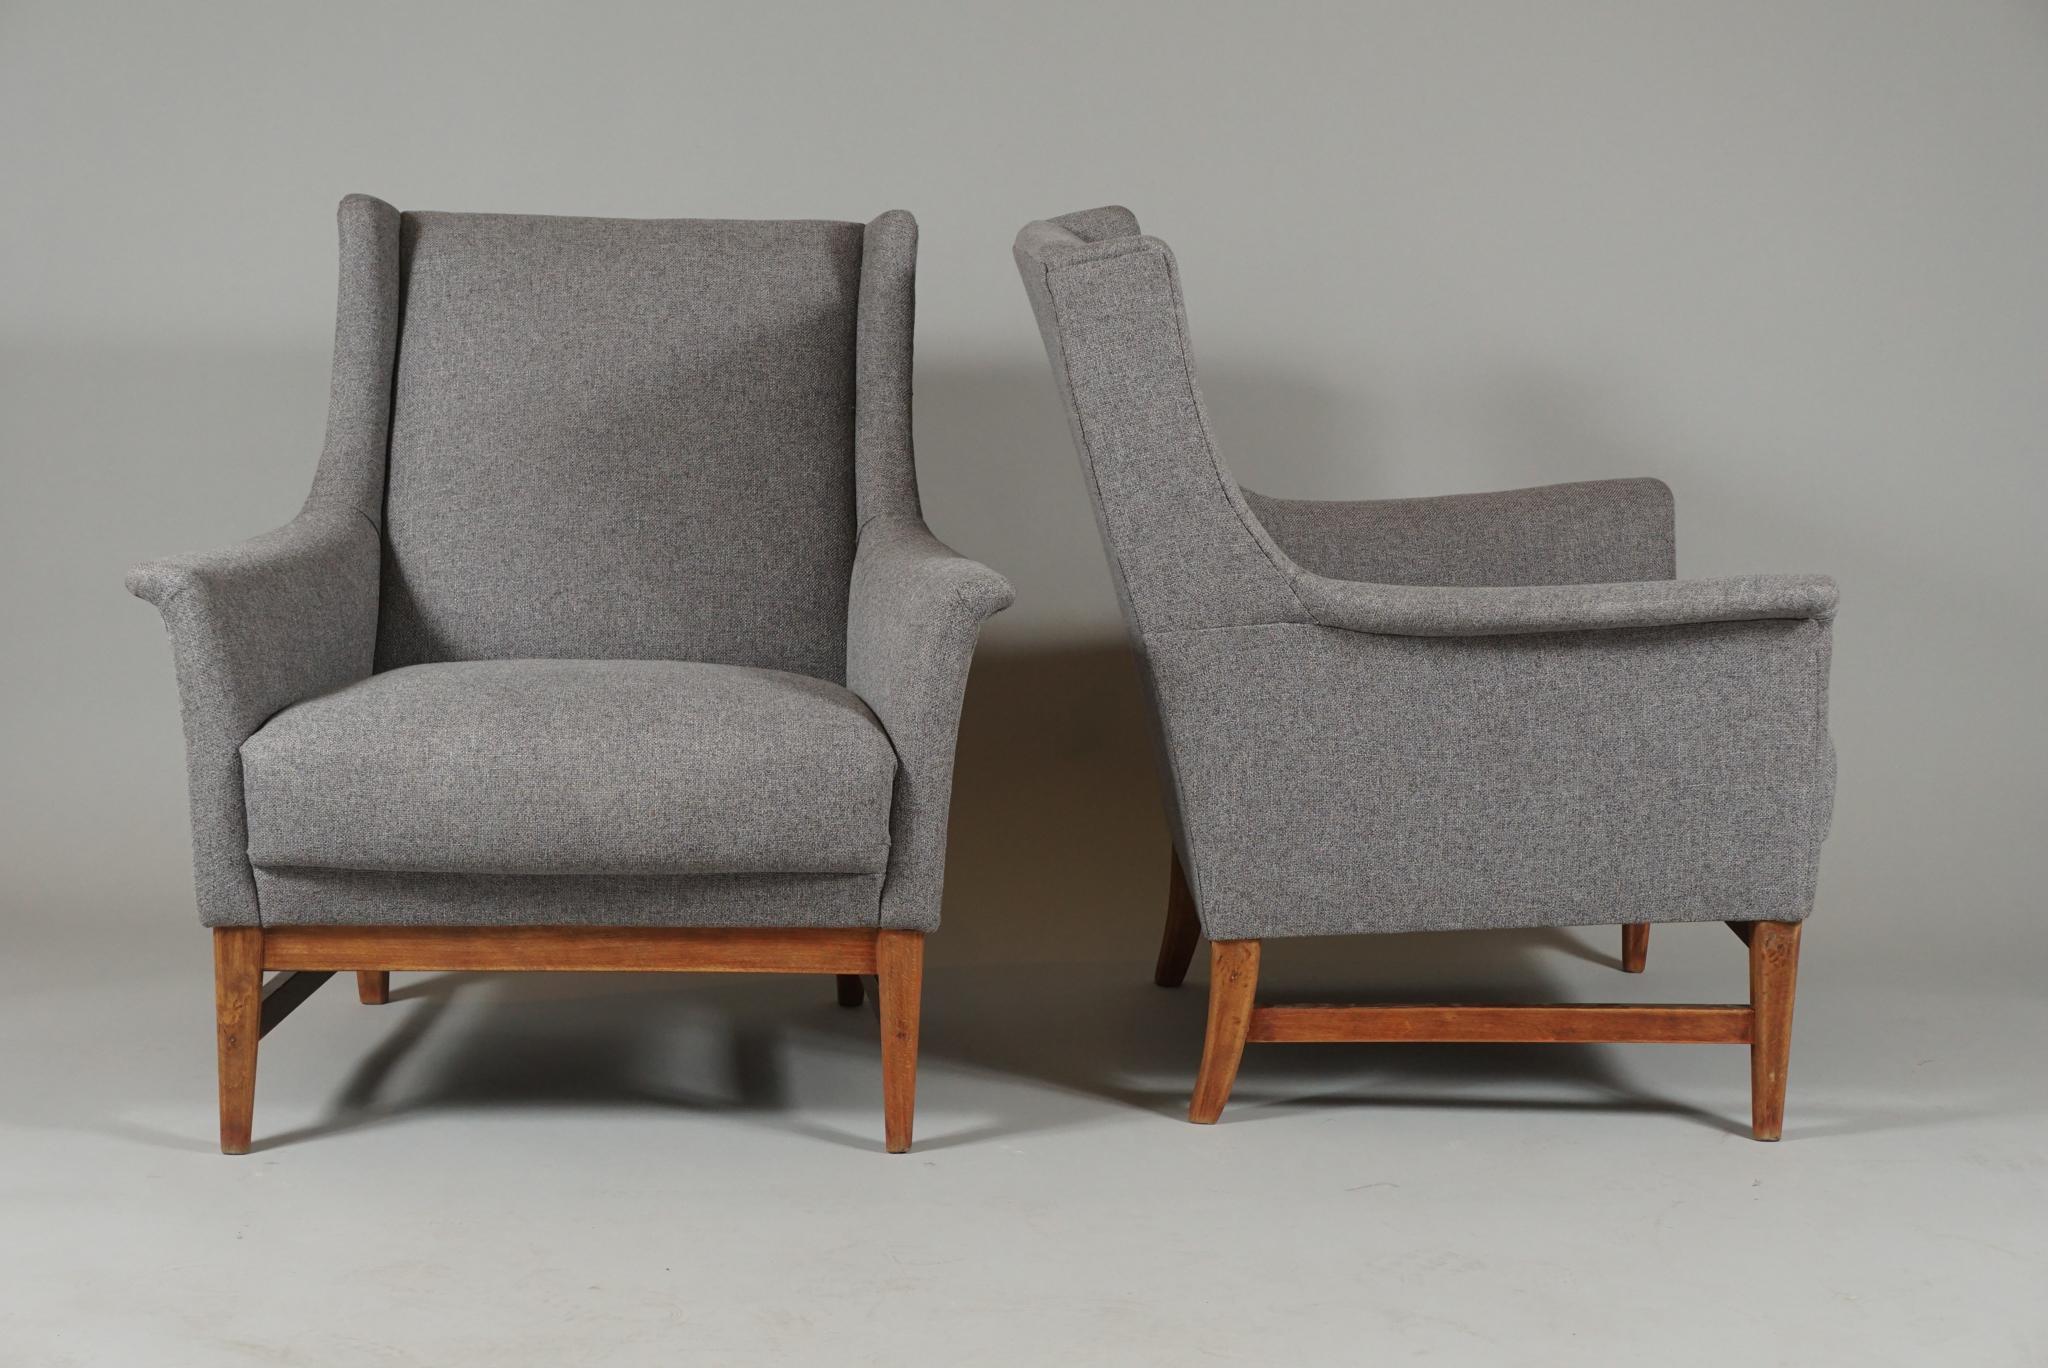 Beautifully upholstered midcentury armchairs. Interesting and unusual silhouette.